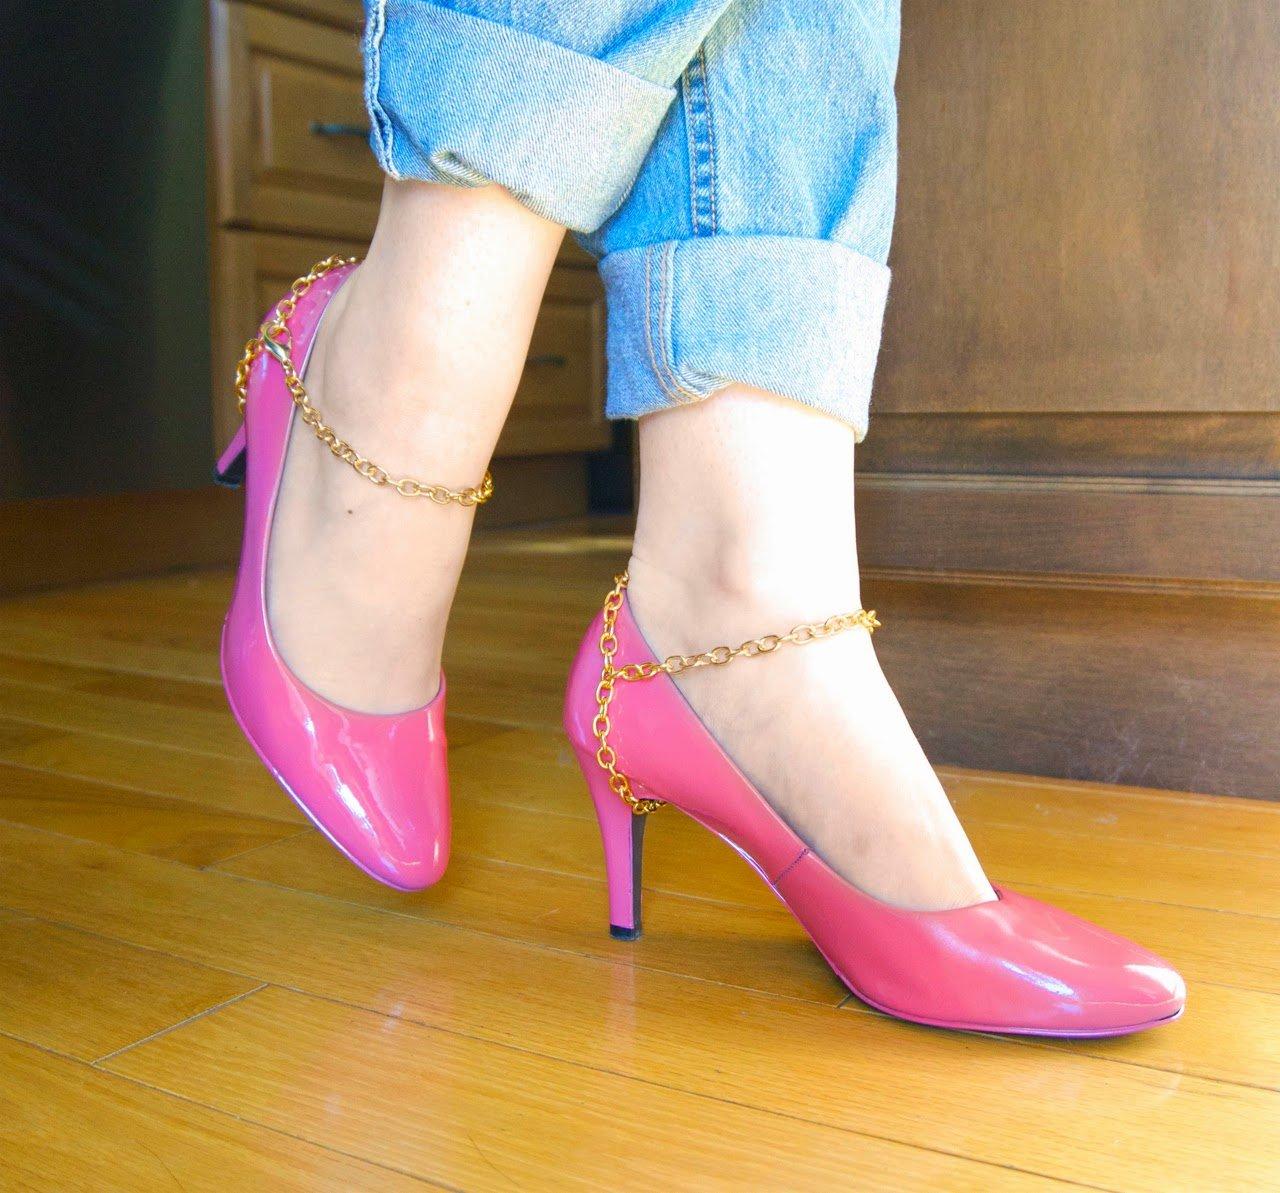 DIY To Make Your Old High Heels Look Fabulous